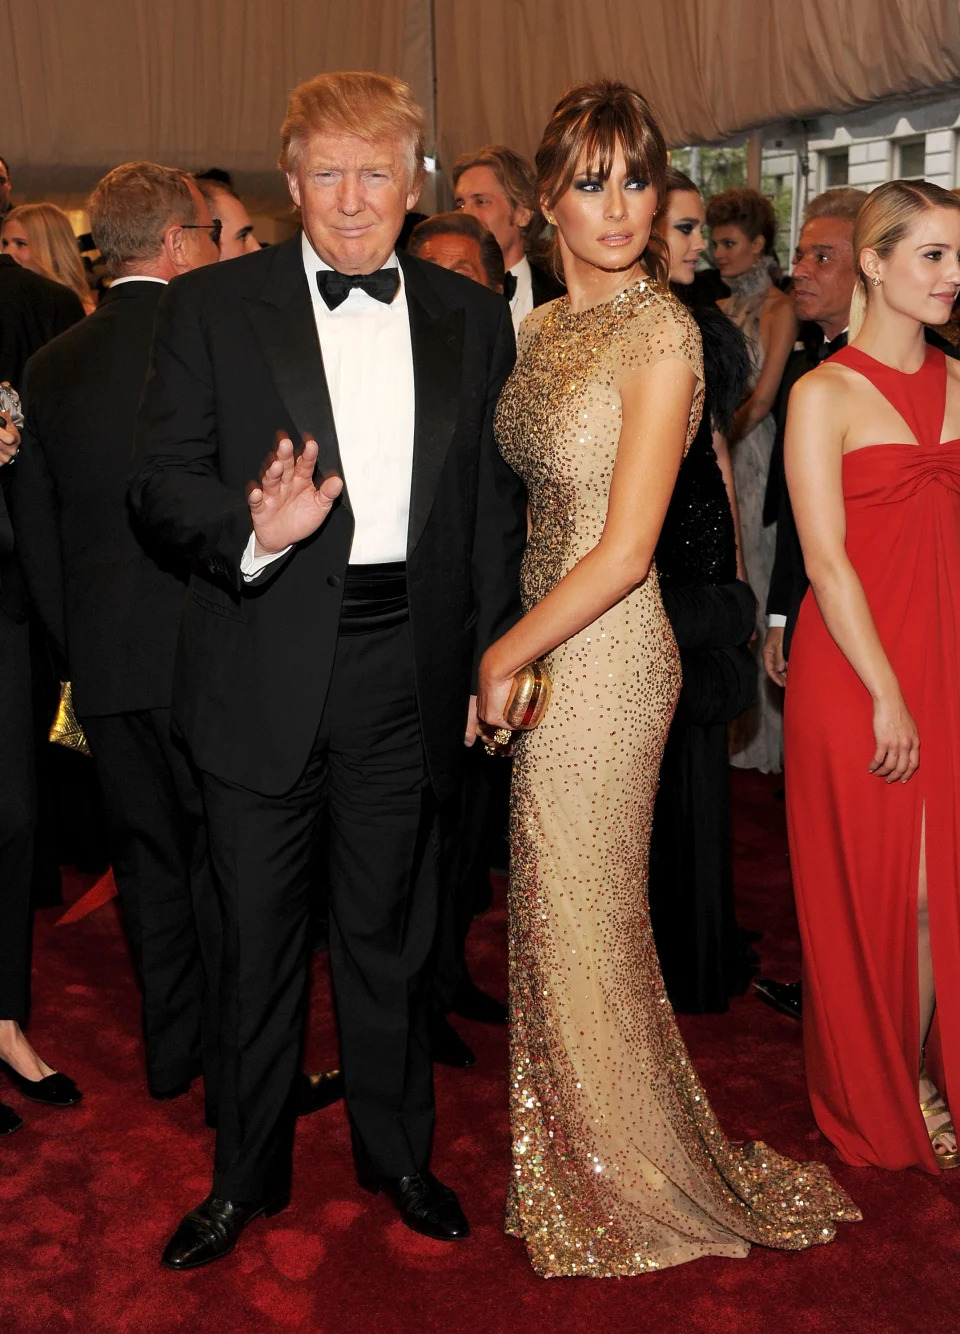 Donald Trump and Melania Trump attend the Met Gala in 2011